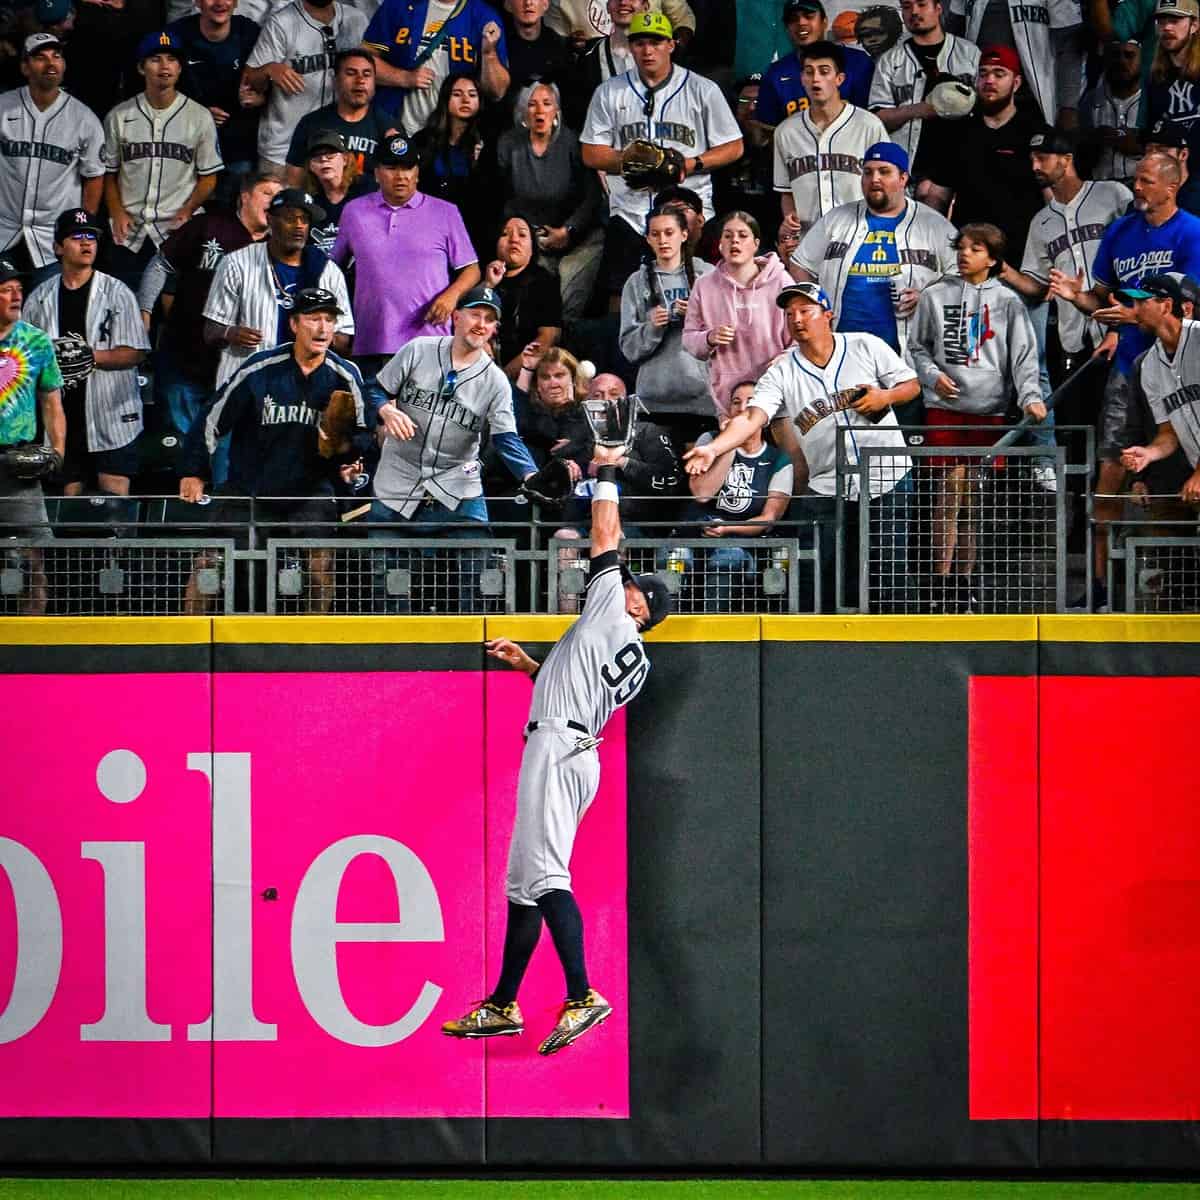 Aaron Judge of the Yankees is taking a spectacular catch prevented Teoscar Hernandez of Seattle from hitting a home run on May 29, 2023.